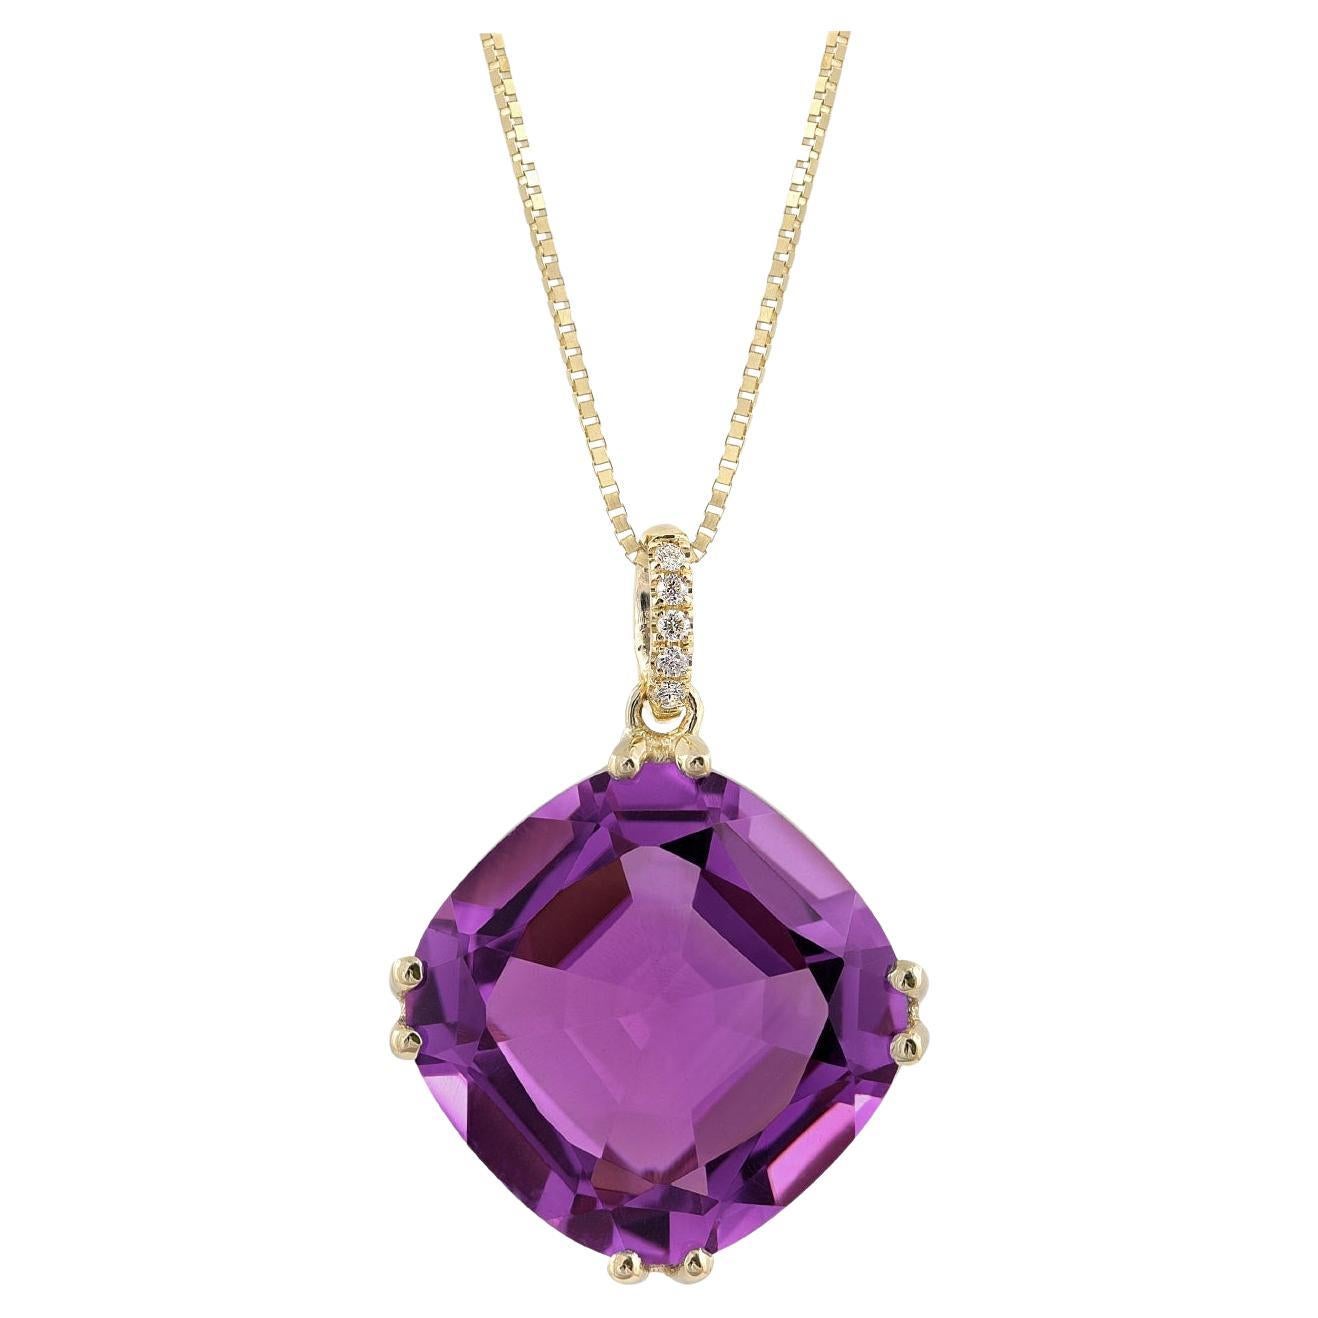 Pendant with 17.96 carats Amethyst Diamonds set in 14K Yellow Gold